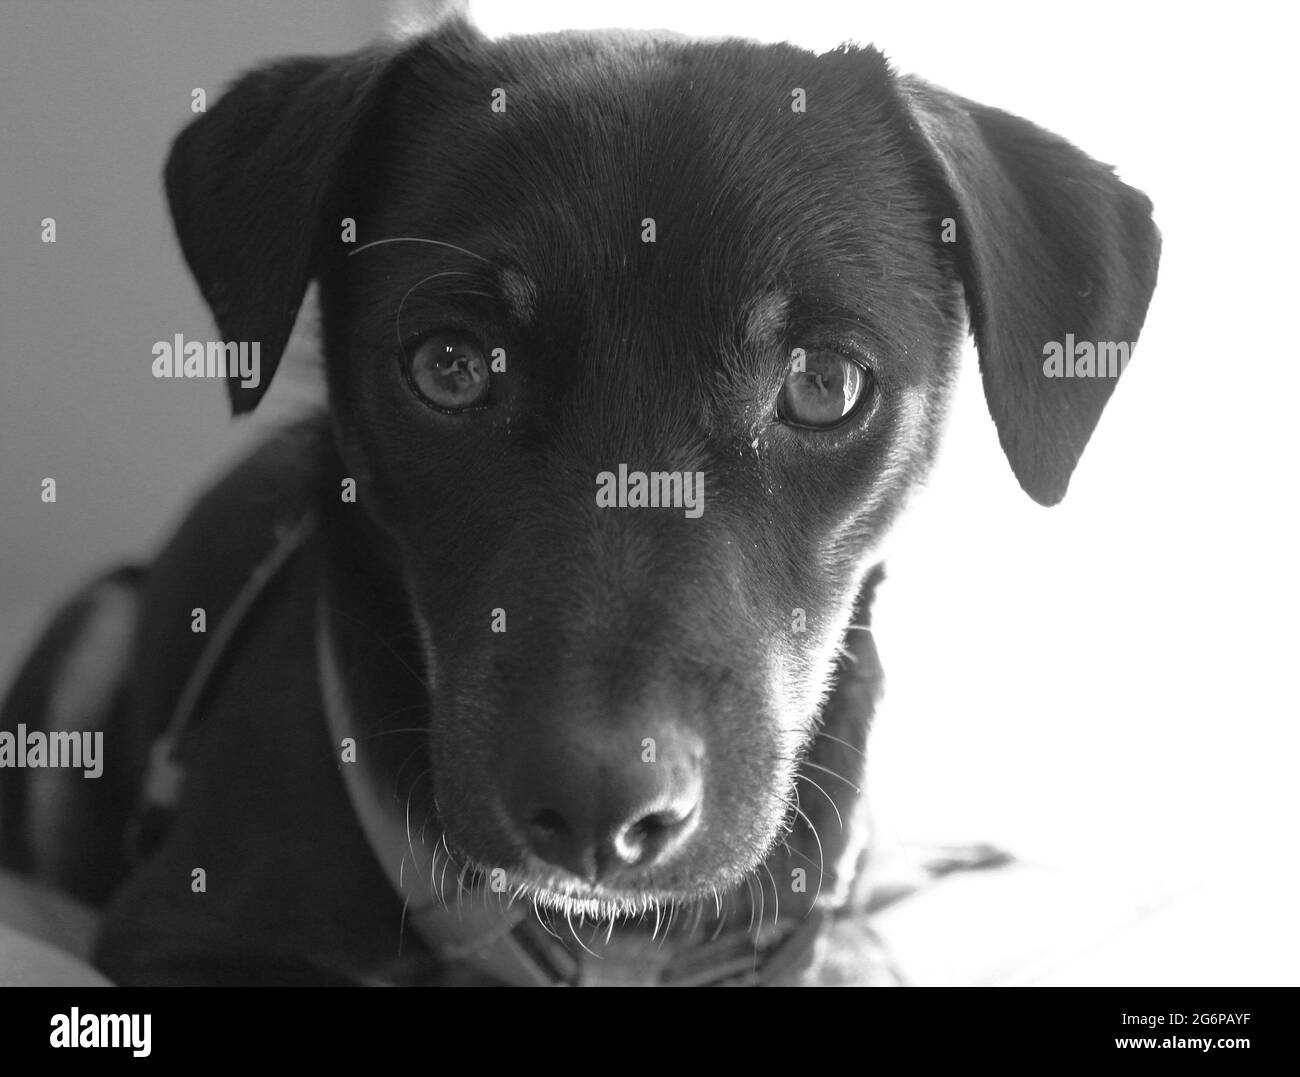 Black and white photo of a dog. Stock Photo